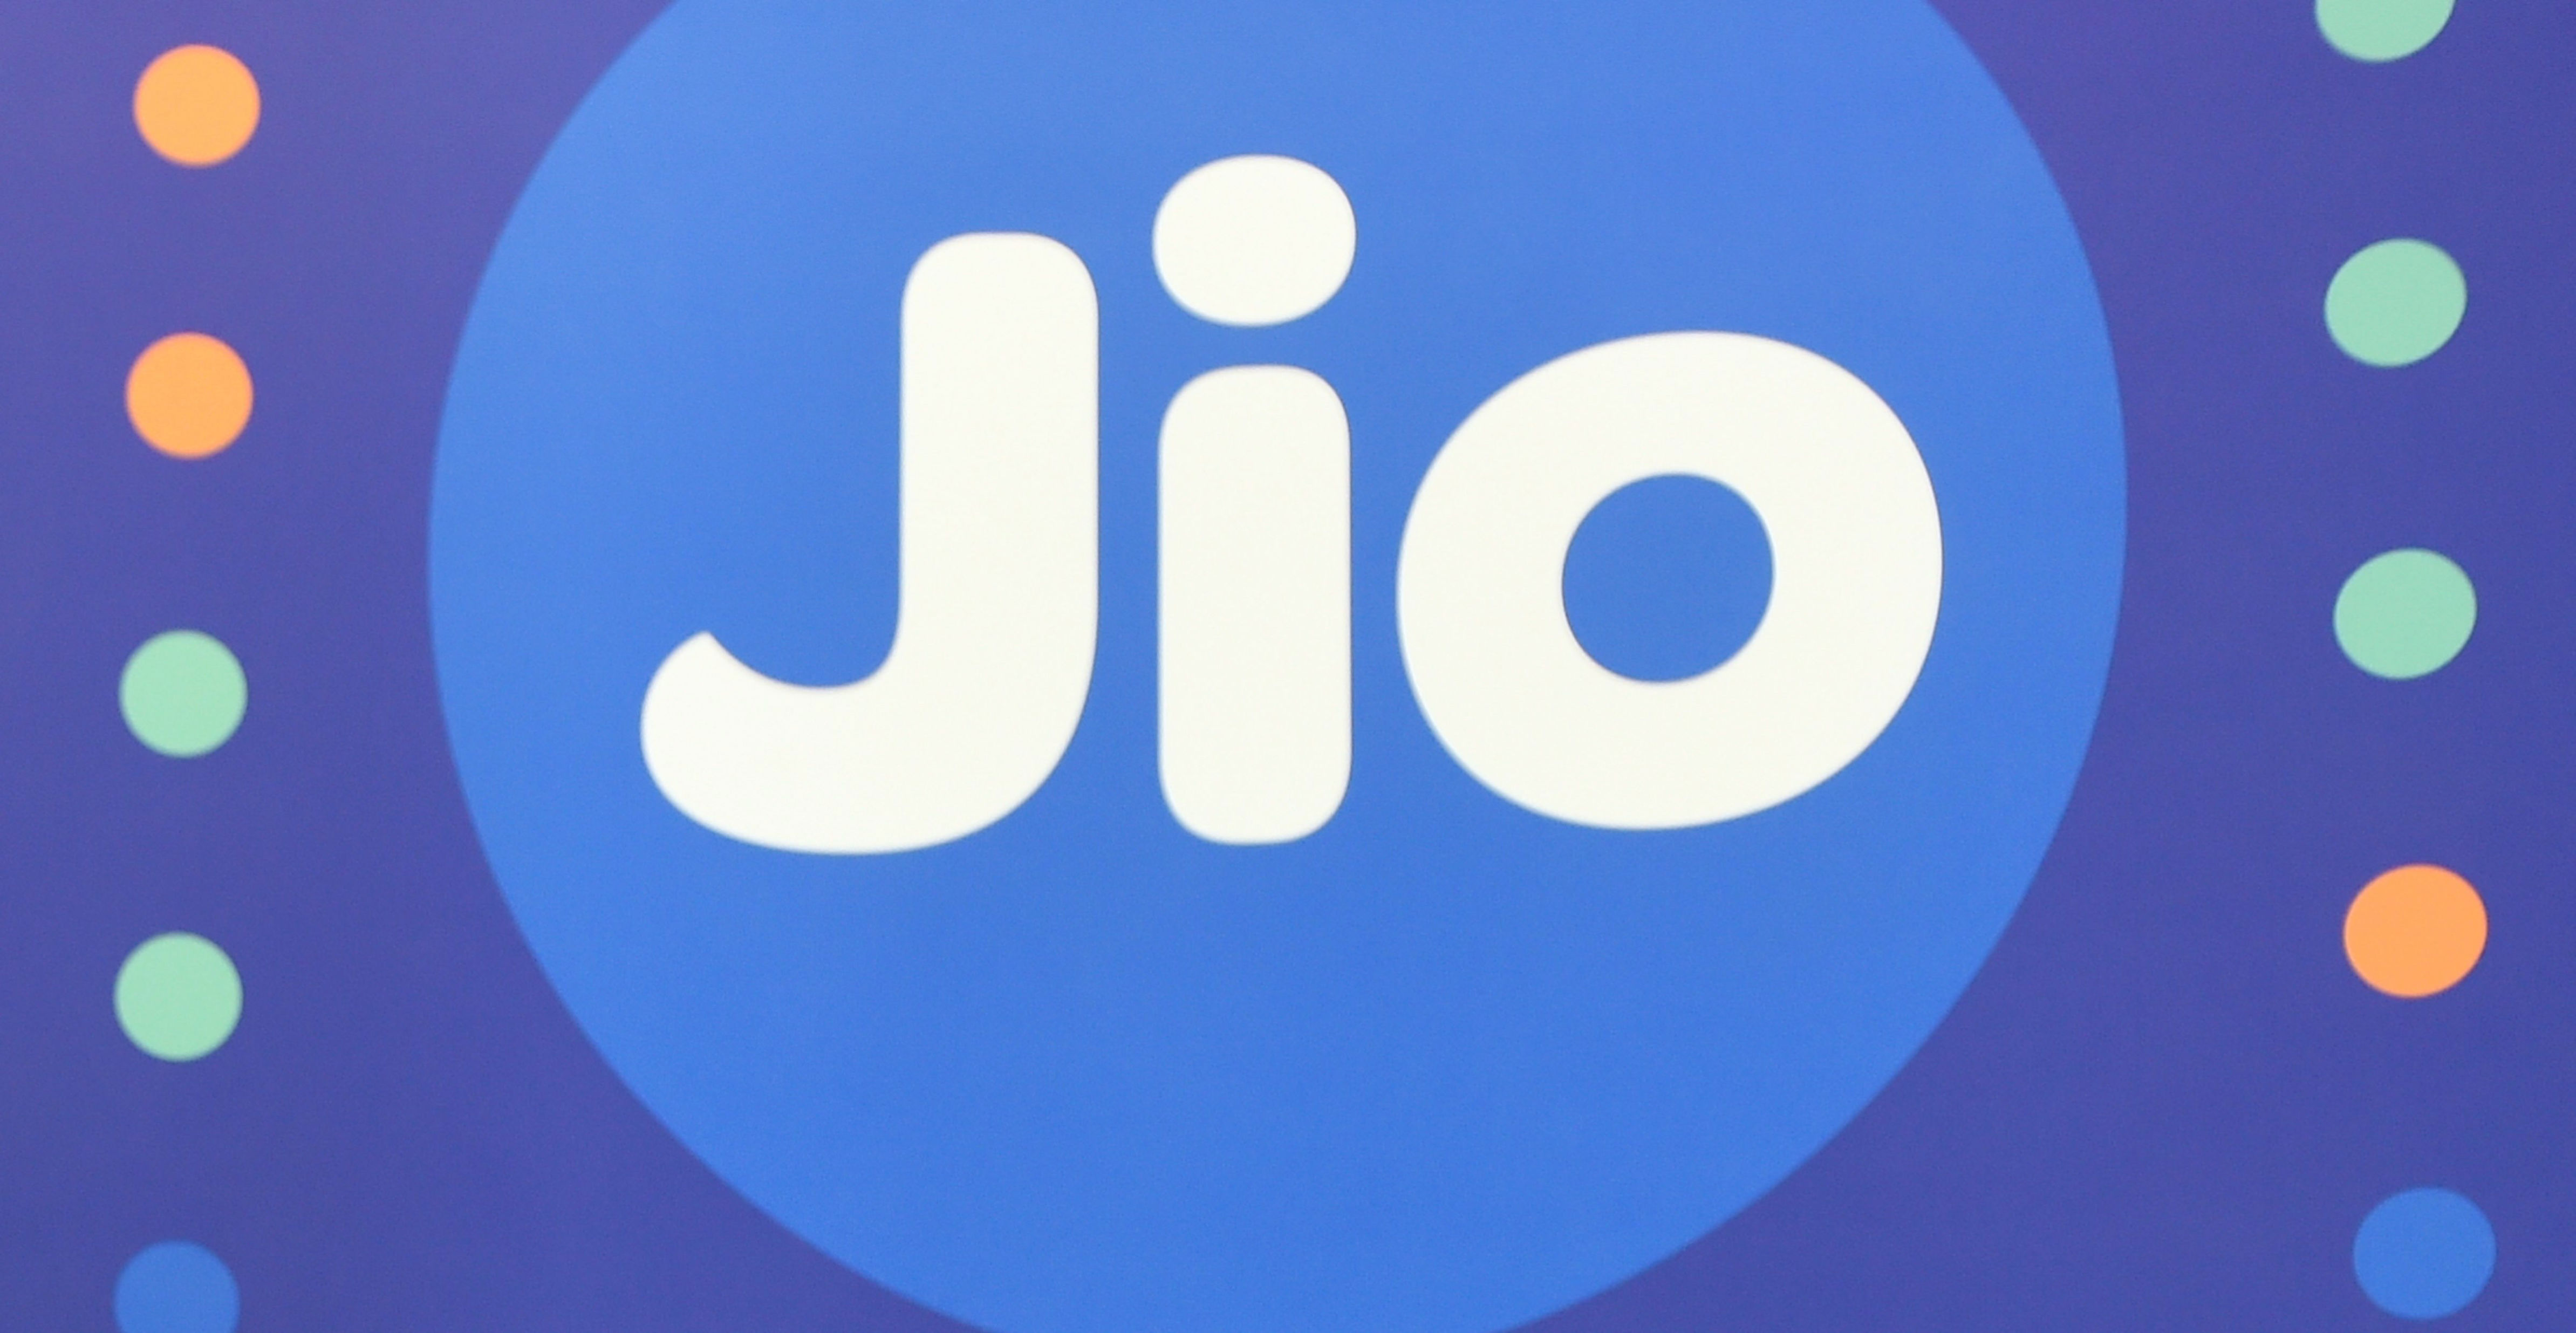 amazon, jio bundles 15 apps' premium services including netflix basic subscription with broadband plan for rs 888/month